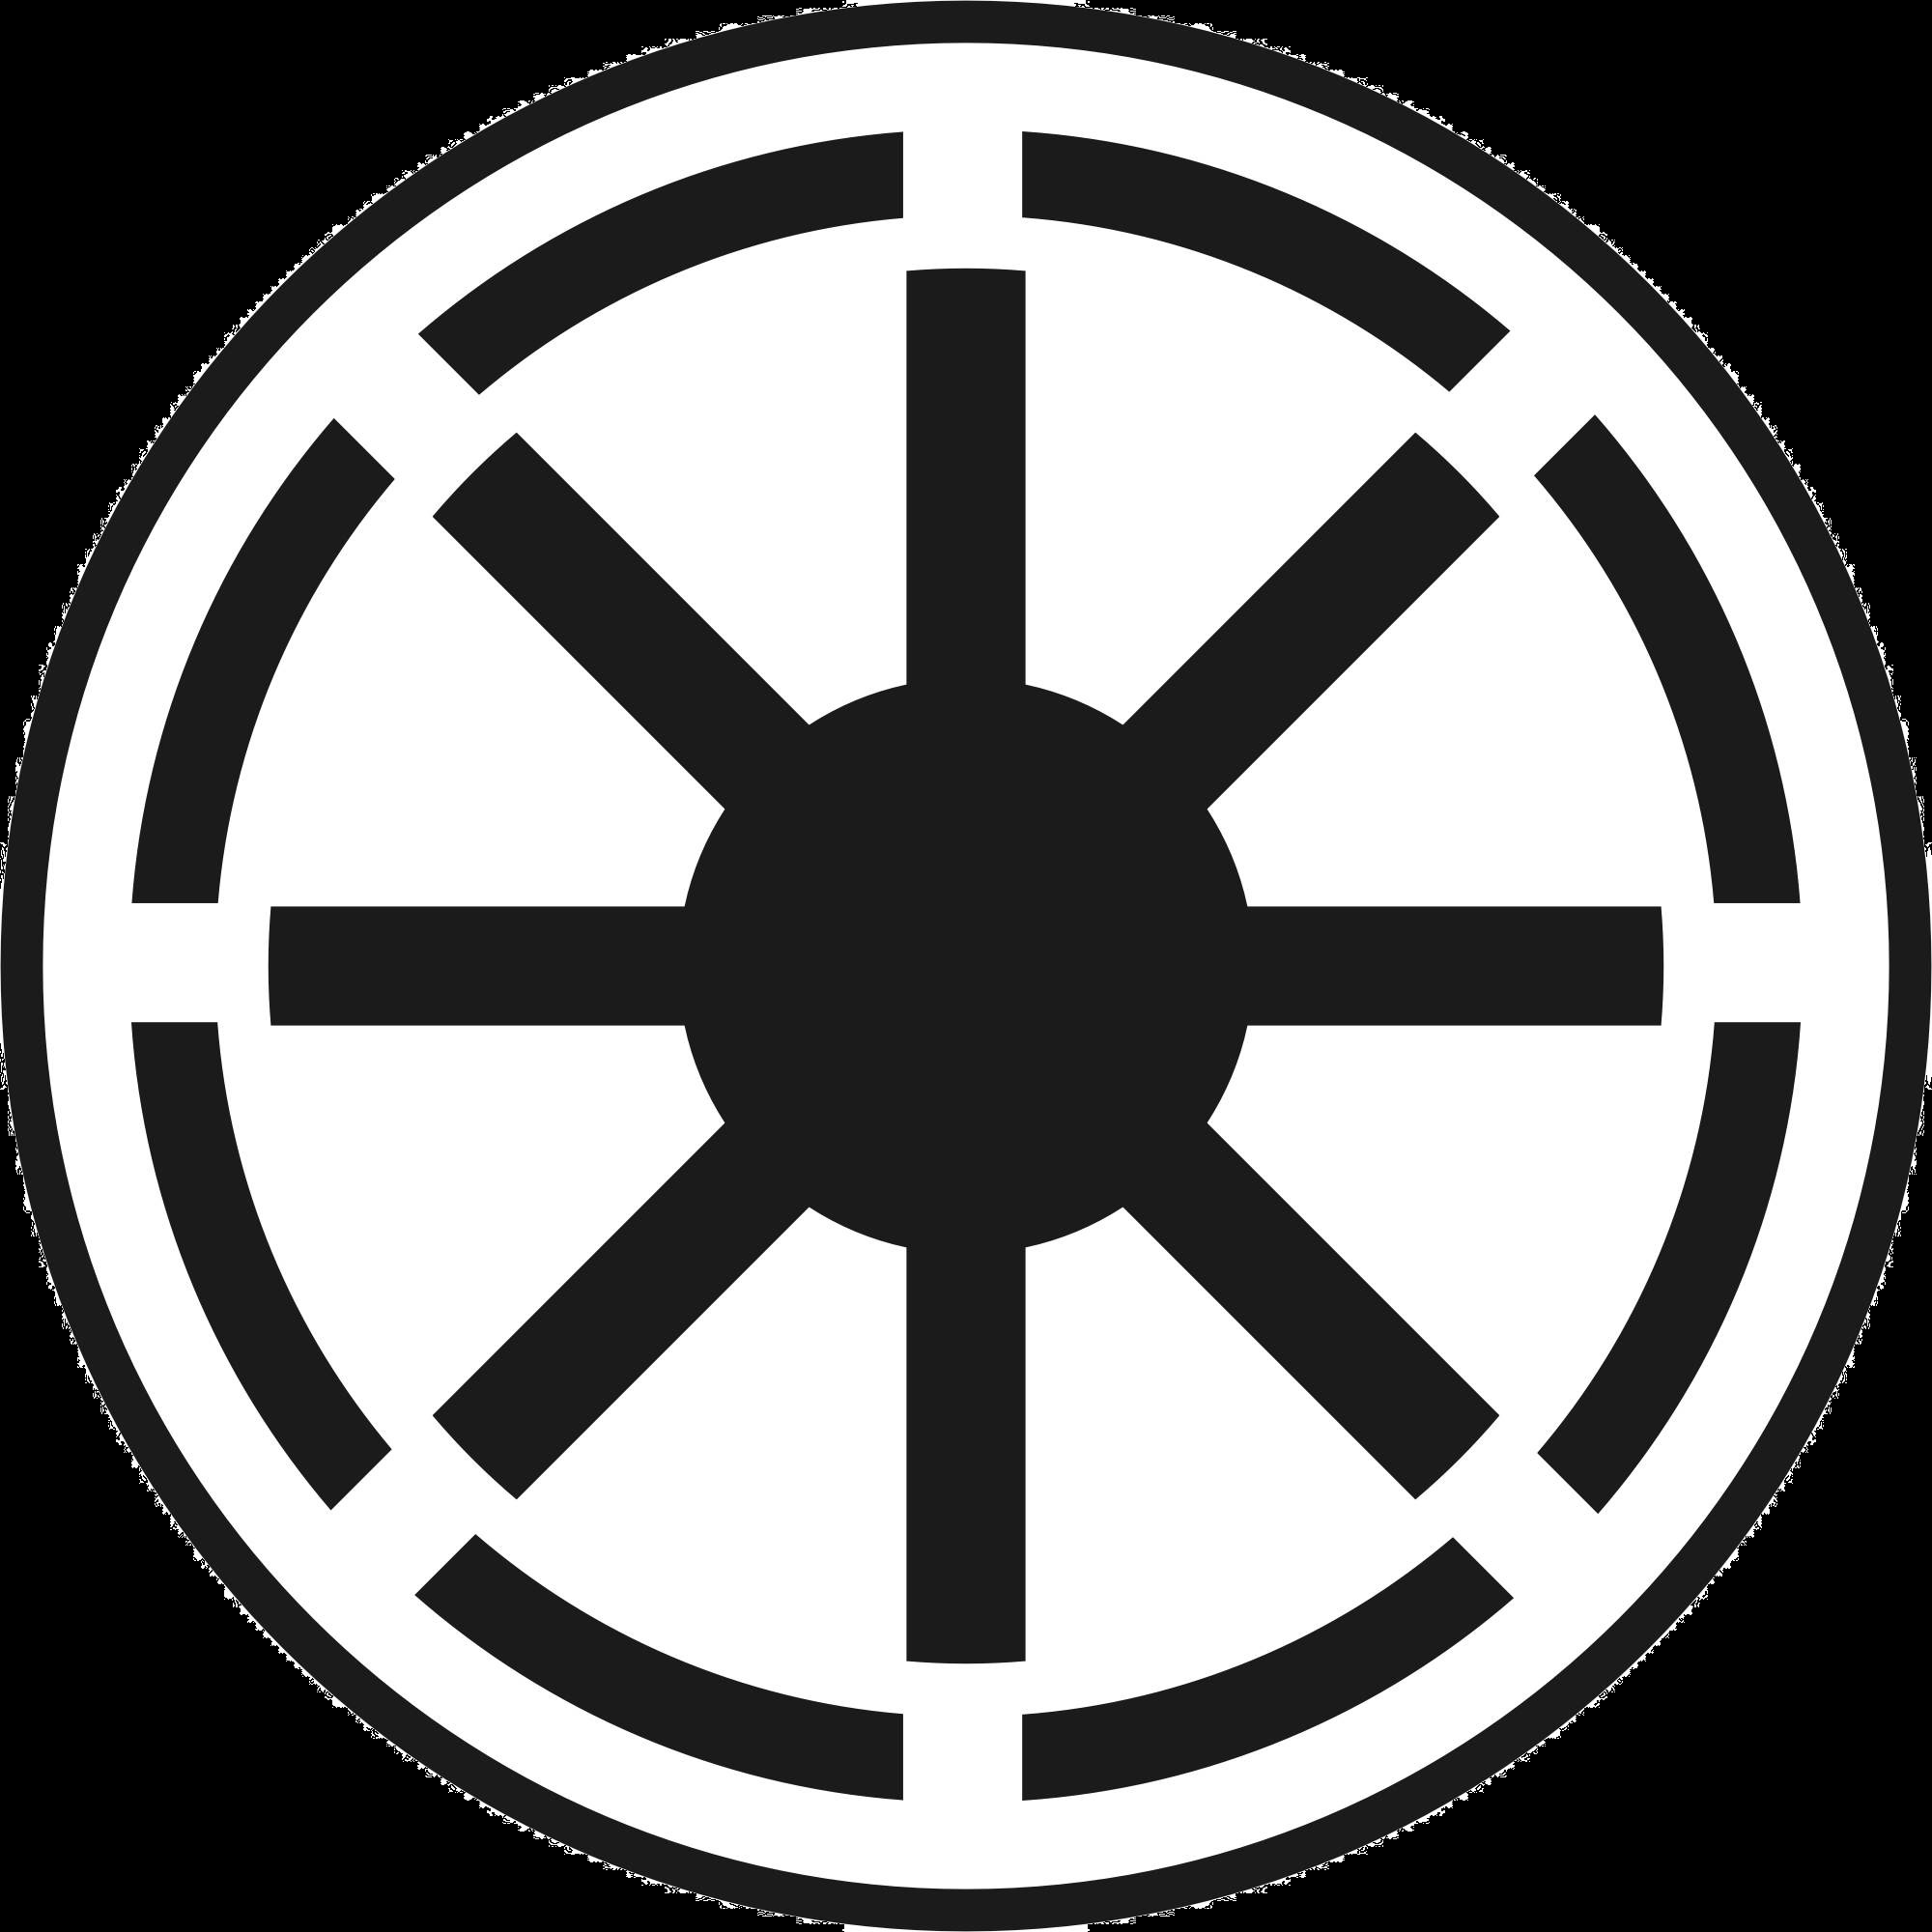 Image The Galactic Republic Star Wars Rebels Wiki Fandom Powered By Wikia